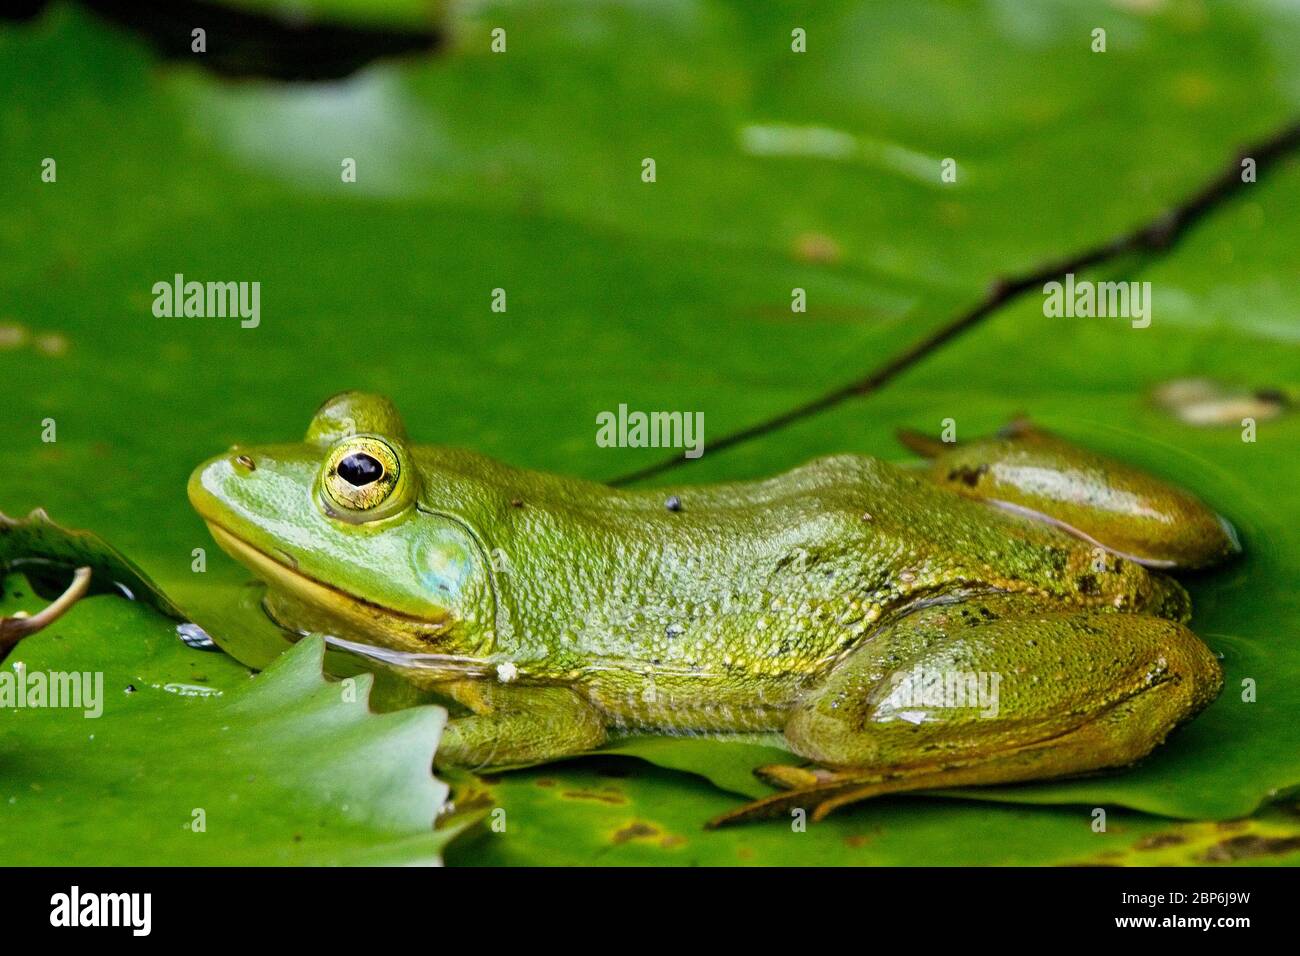 Euphlyctis hexadactylus, also known as the Green Pond Frog, Indian Green Frog, and Indian Five-fingered Frog, Sinharaja Forest Park, Sri Lanka. Stock Photo